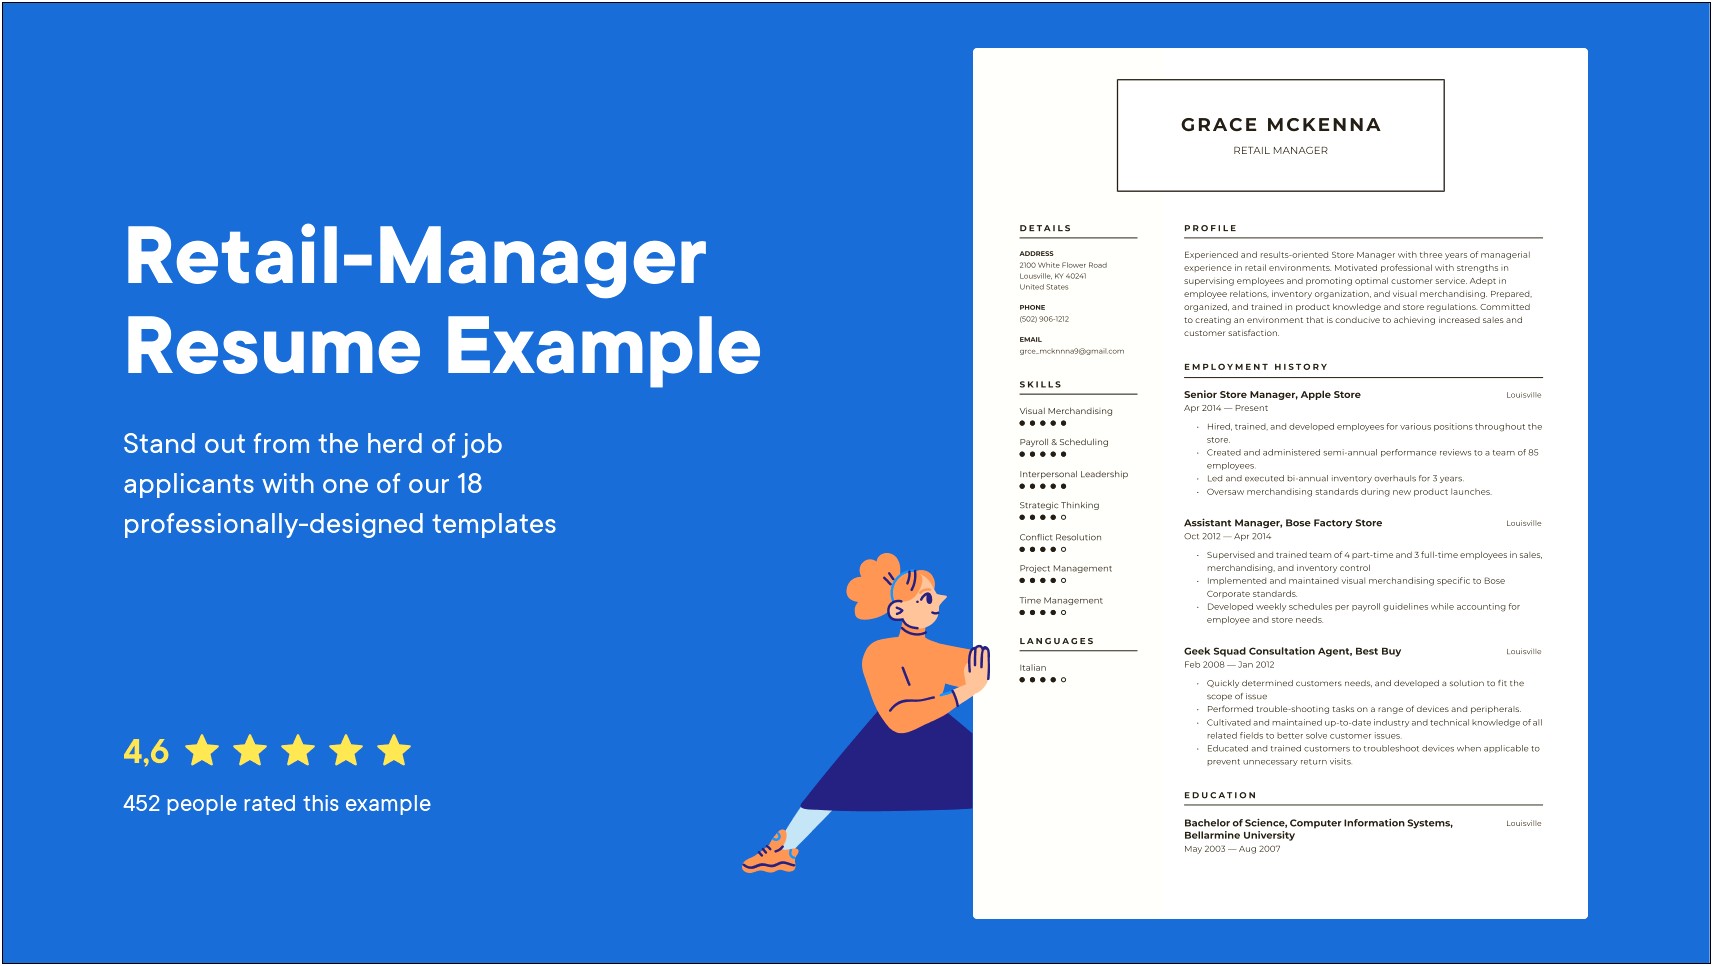 Does Retail Management Look Good On A Resume